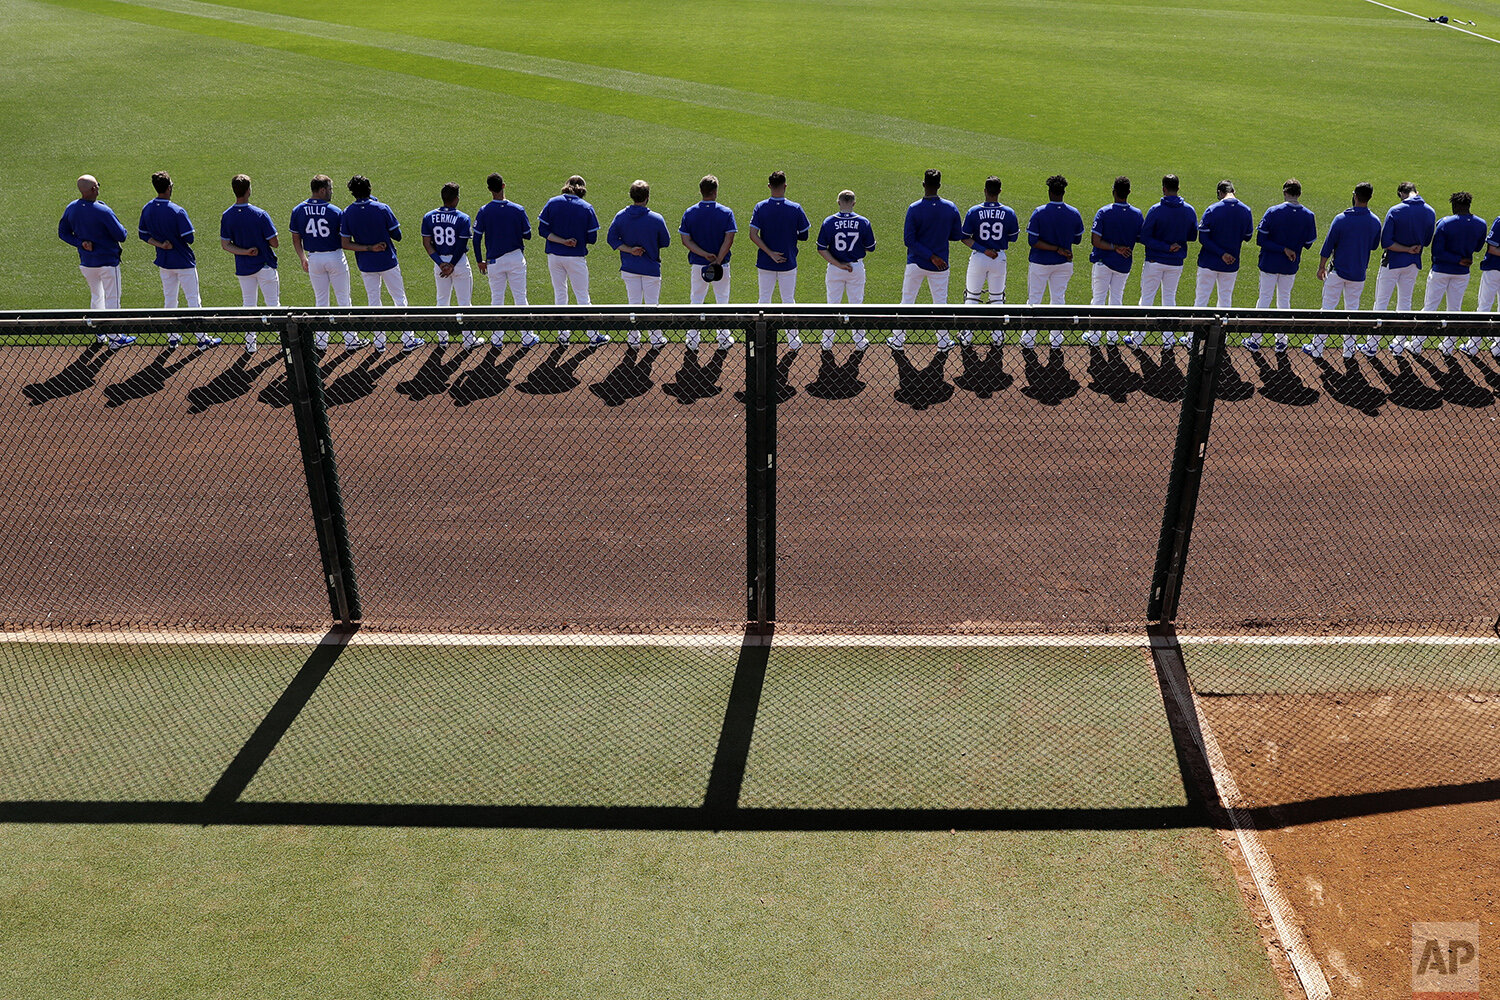  Kansas City Royals players stand for the national anthem before a spring training baseball game against the San Diego Padres Monday, Feb. 24, 2020, in Surprise, Ariz. (AP Photo/Charlie Riedel) 